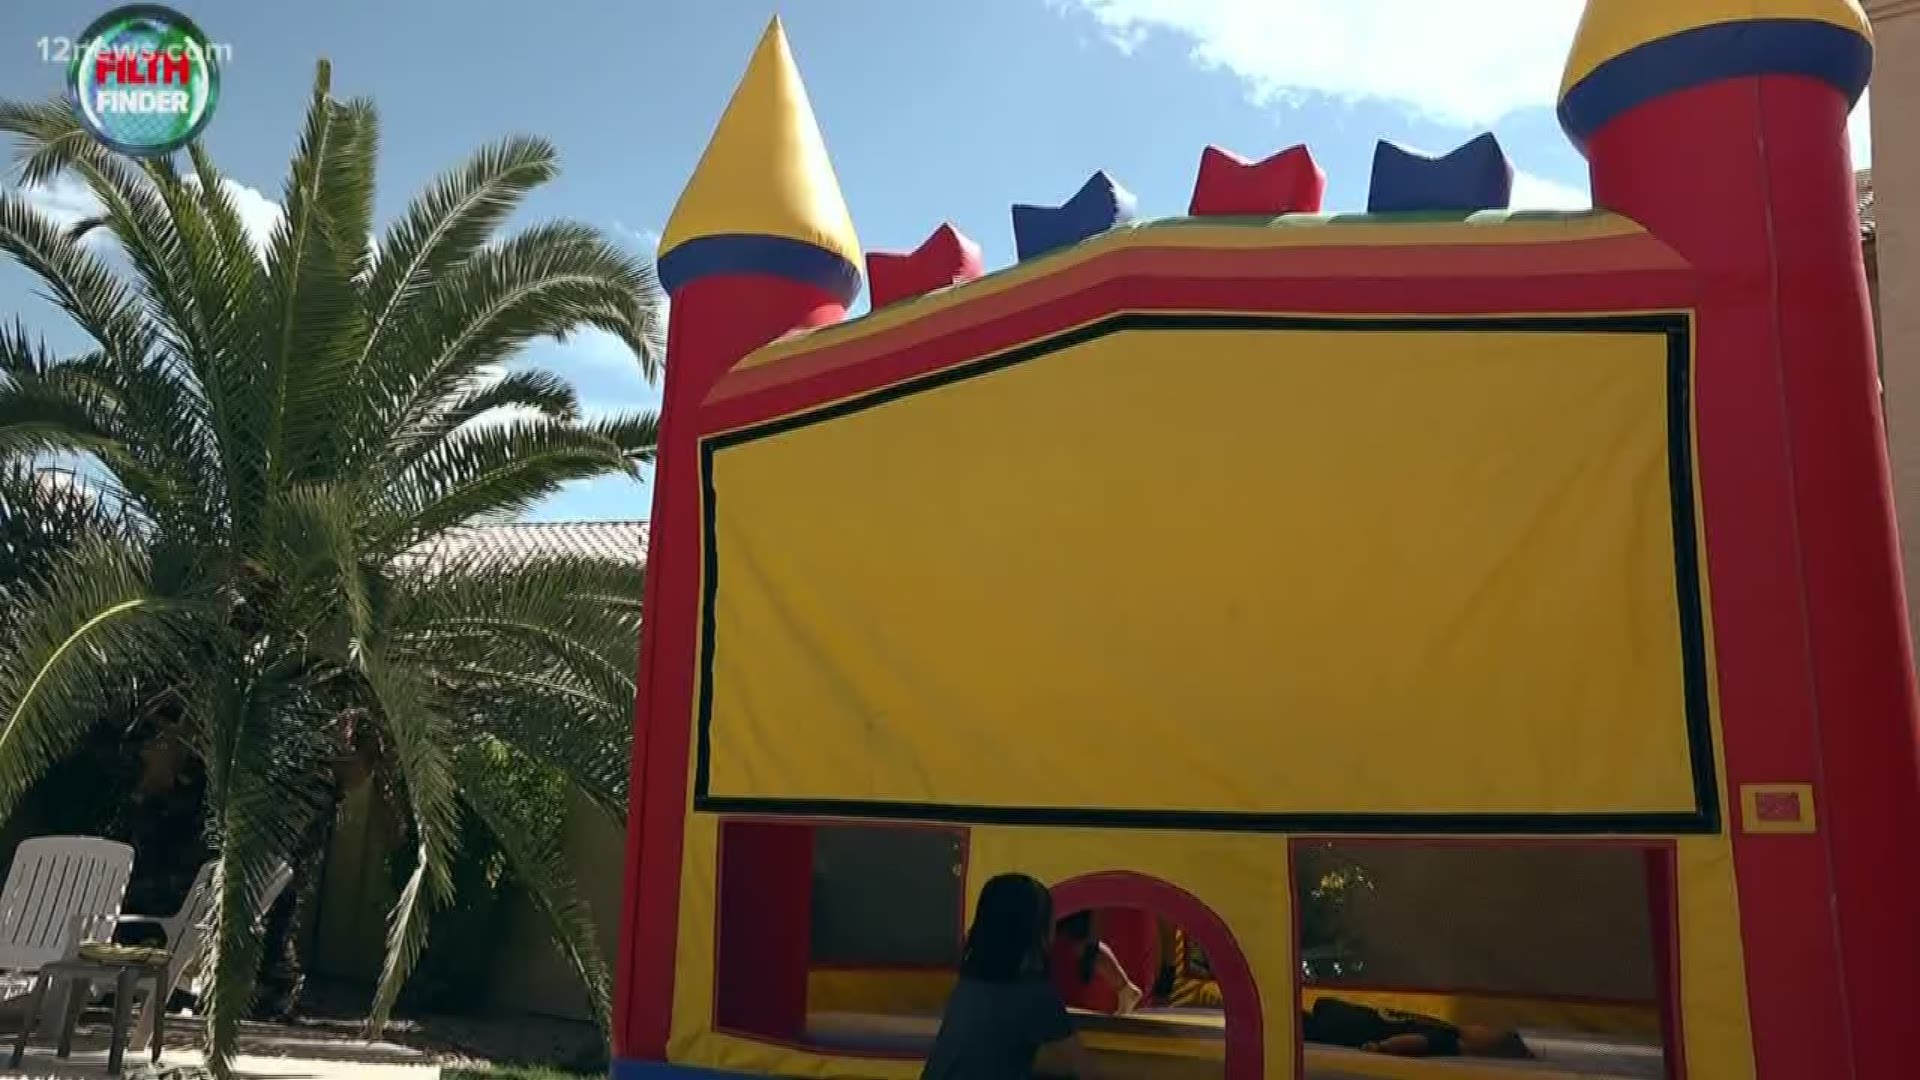 Bounce house companies claim they clean and disinfect the jumping castles before your kids jump in. We test one with a small group of kids to see how clean they are.